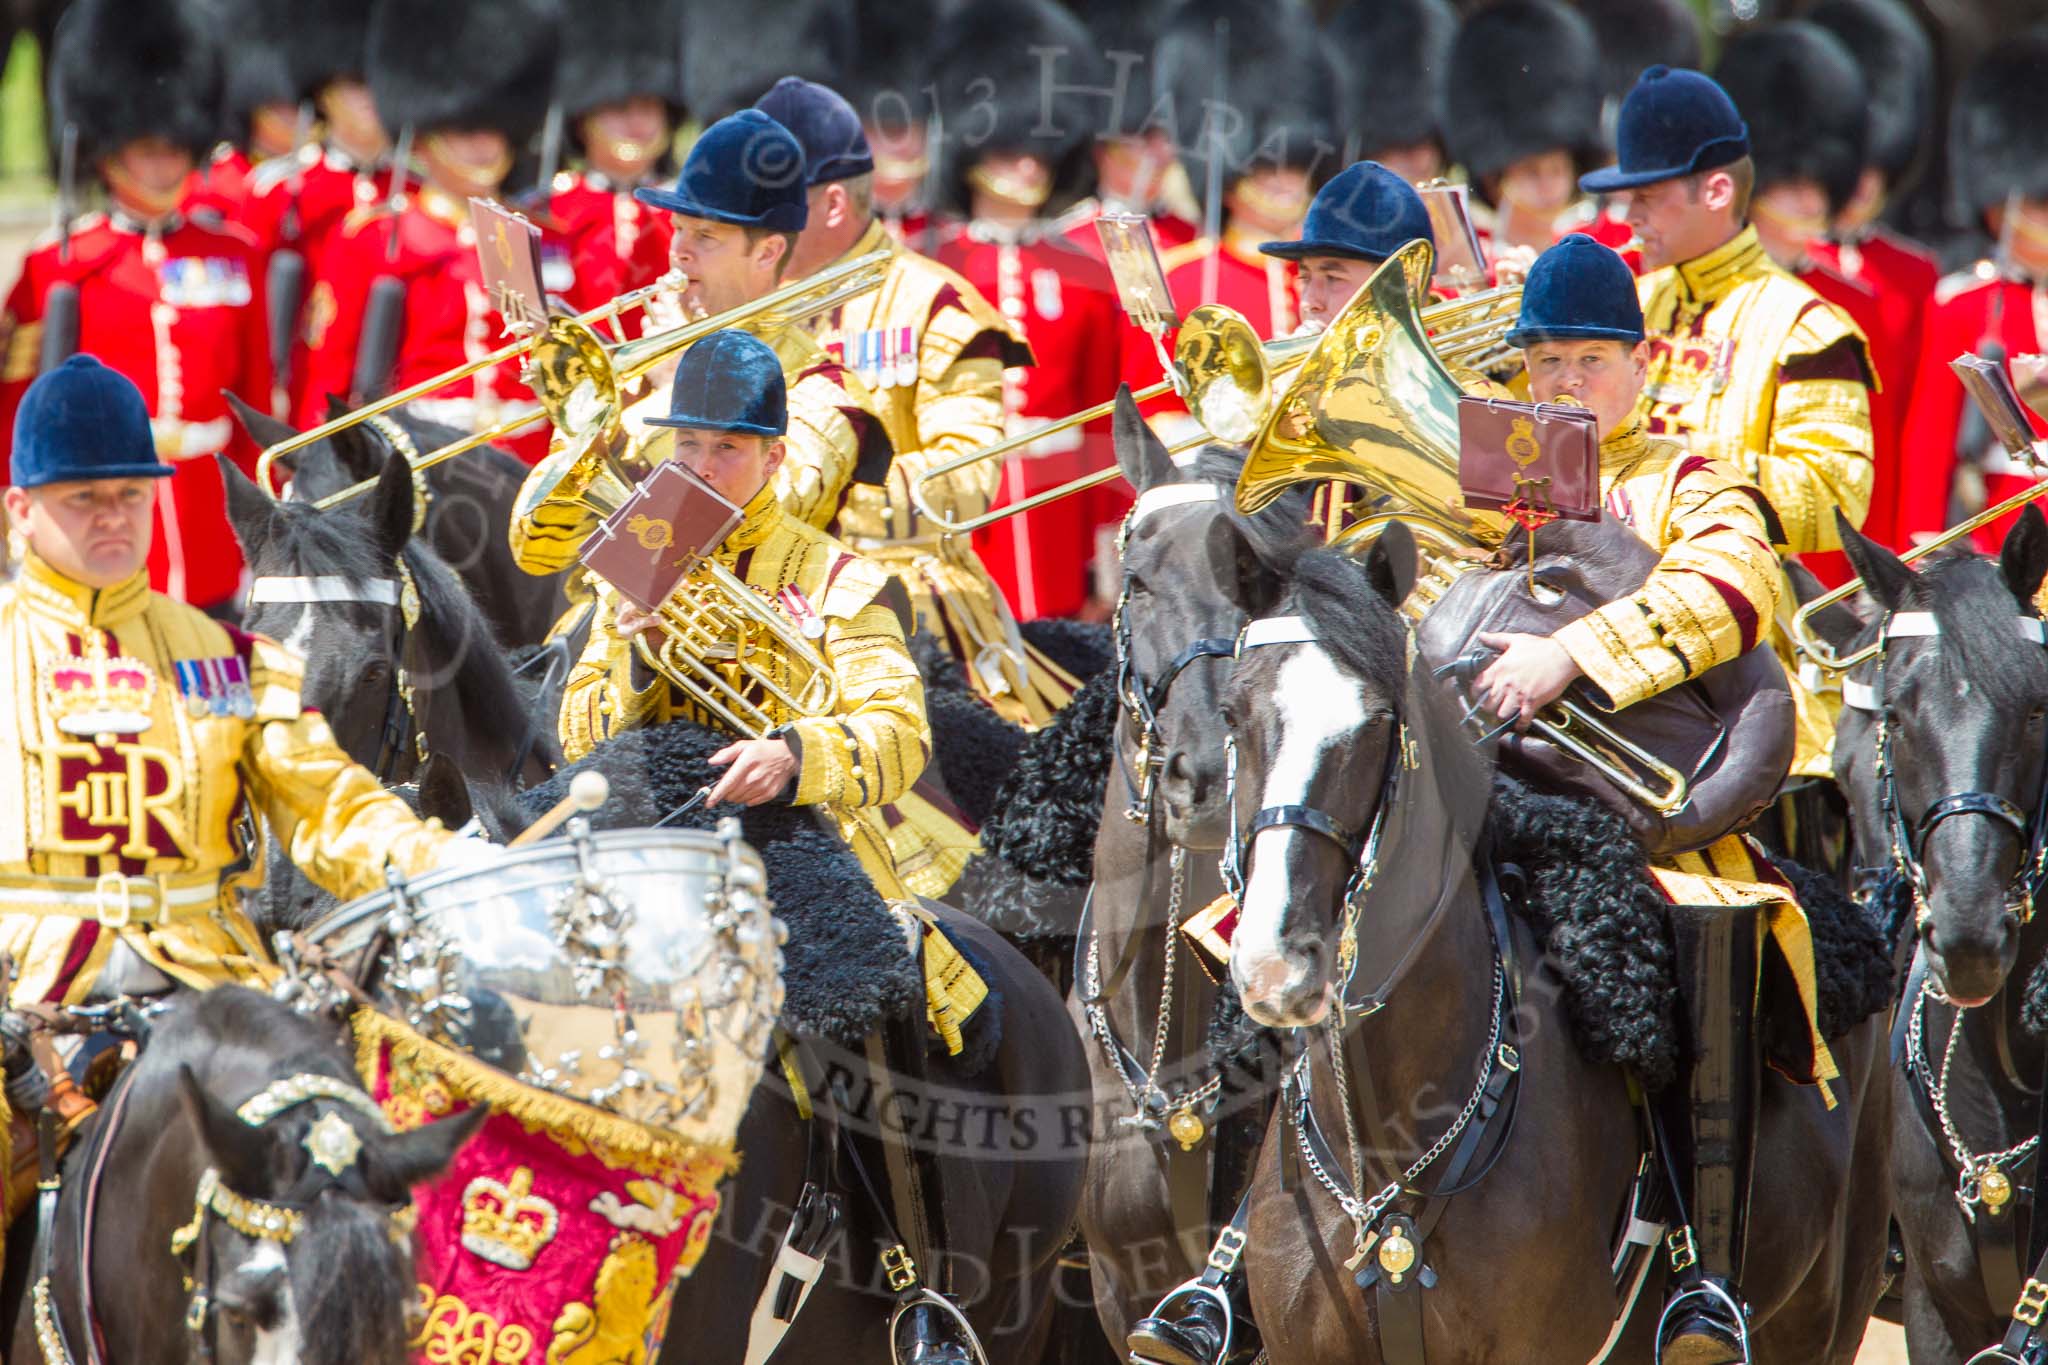 Trooping the Colour 2013: The Ride Past - the Mounted Bands of the Household Cavalry move, from the eastern side, onto Horse Guards Parade. Image #656, 15 June 2013 11:53 Horse Guards Parade, London, UK